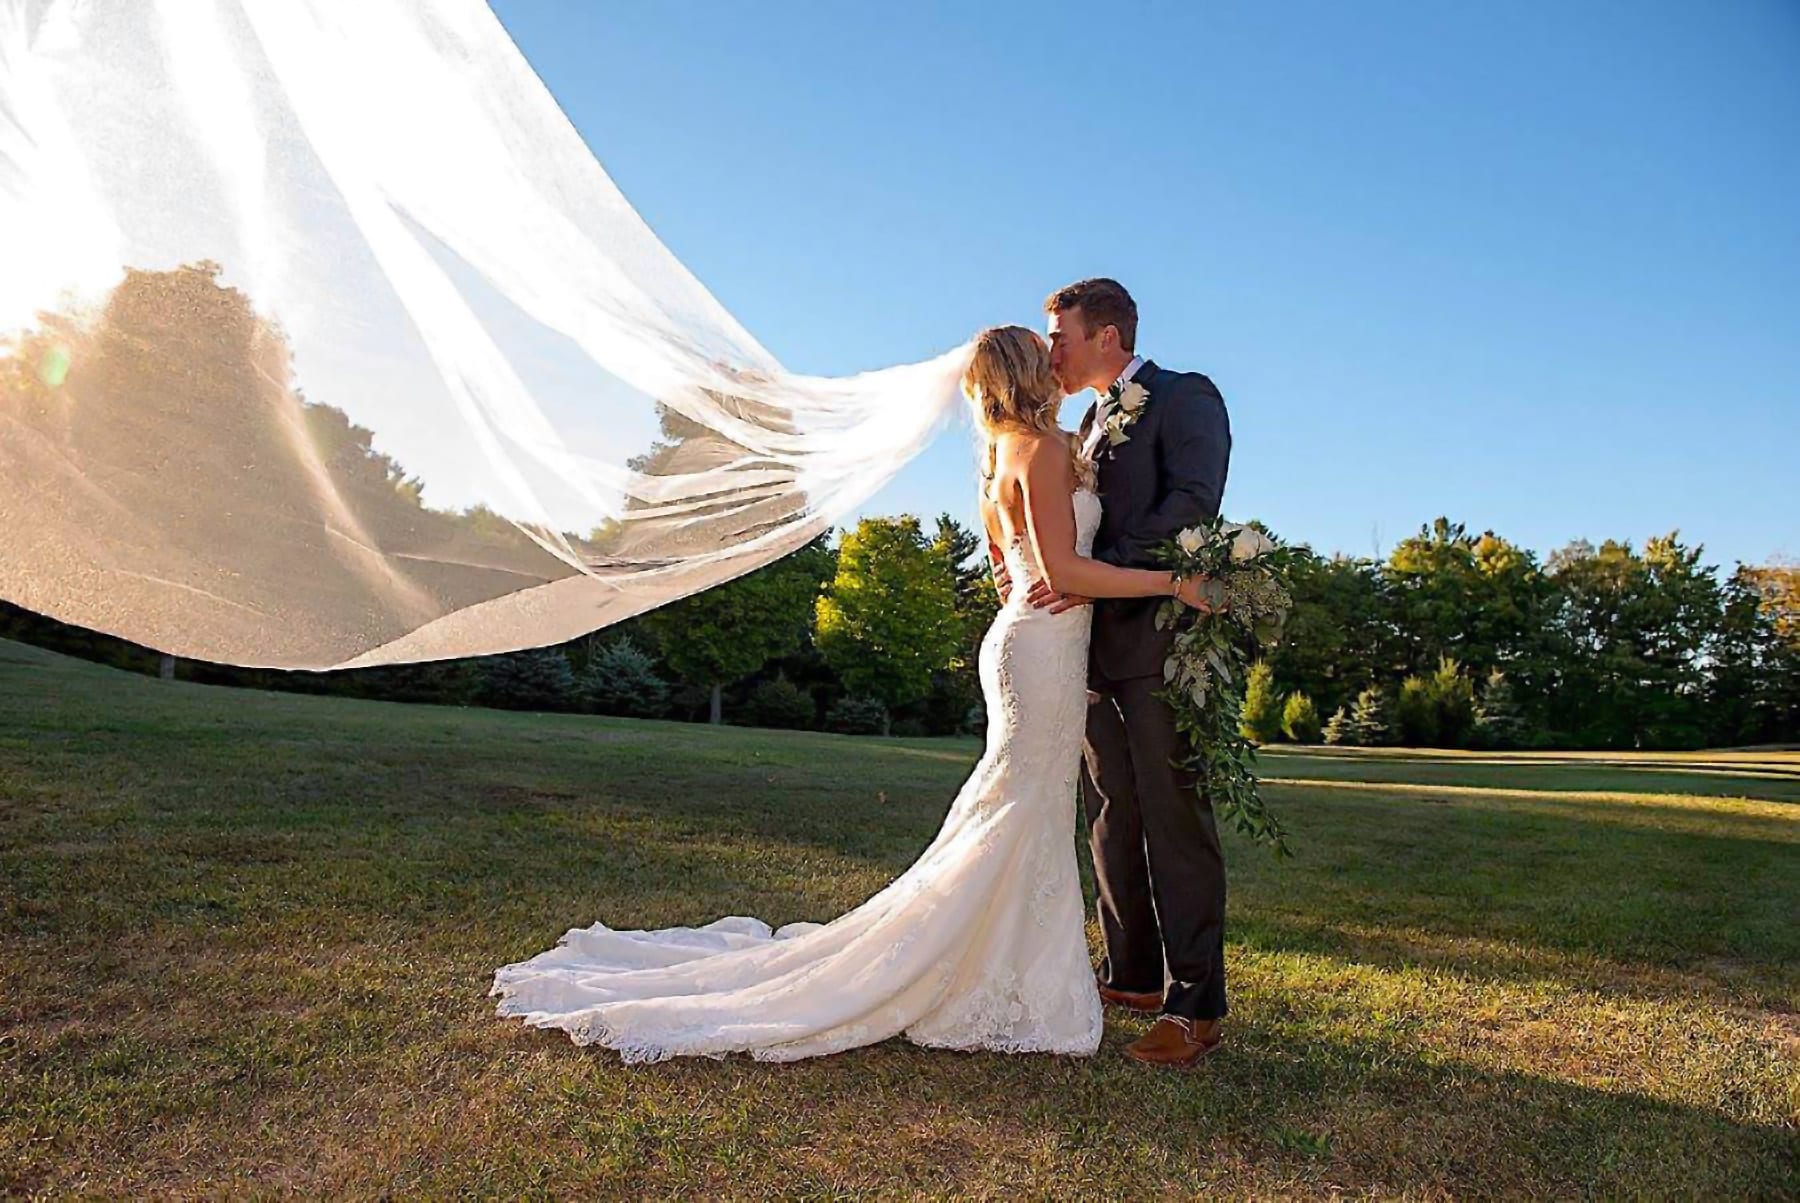 Bride and Groom kissing on a lawn.